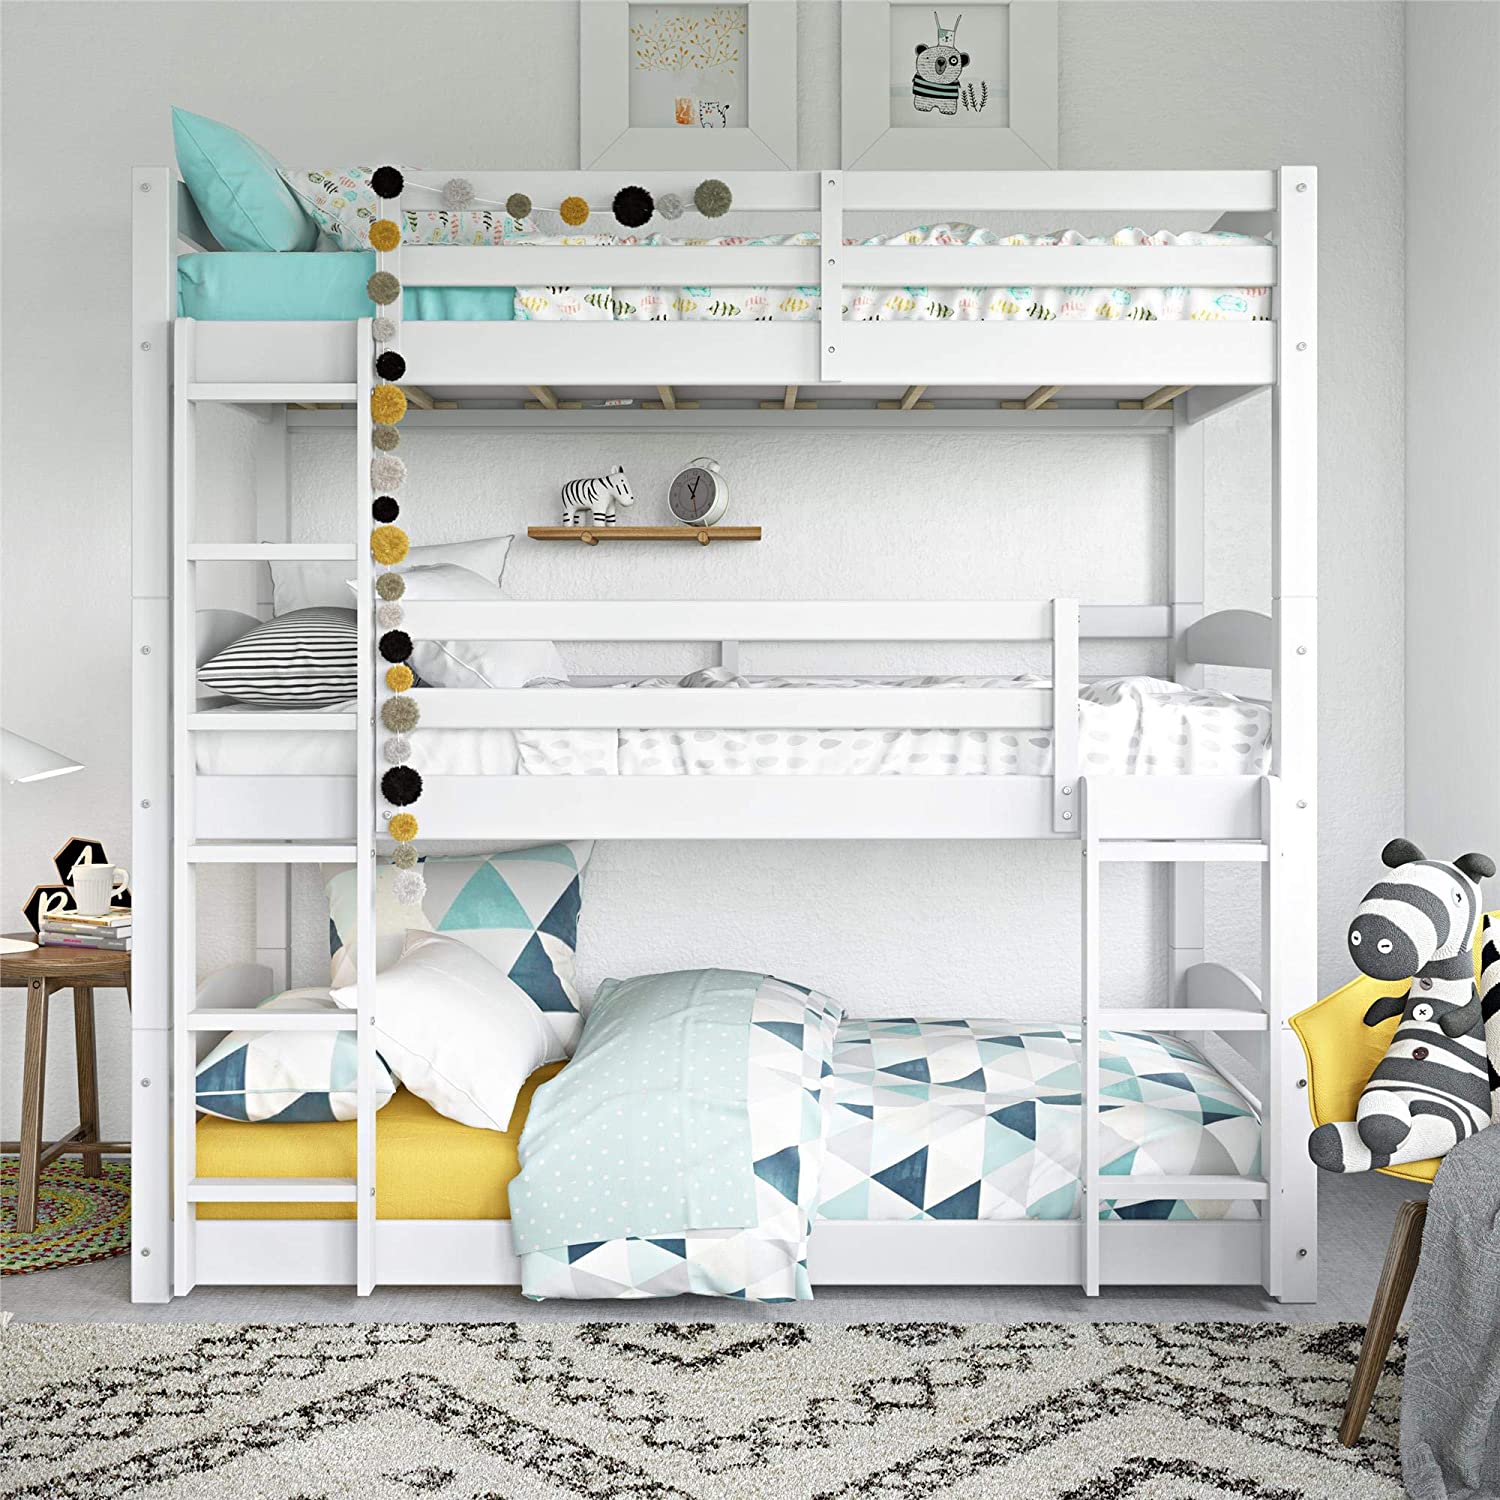 26 Bunk Beds You Ll Want For Yourself, Kids In Bunk Beds